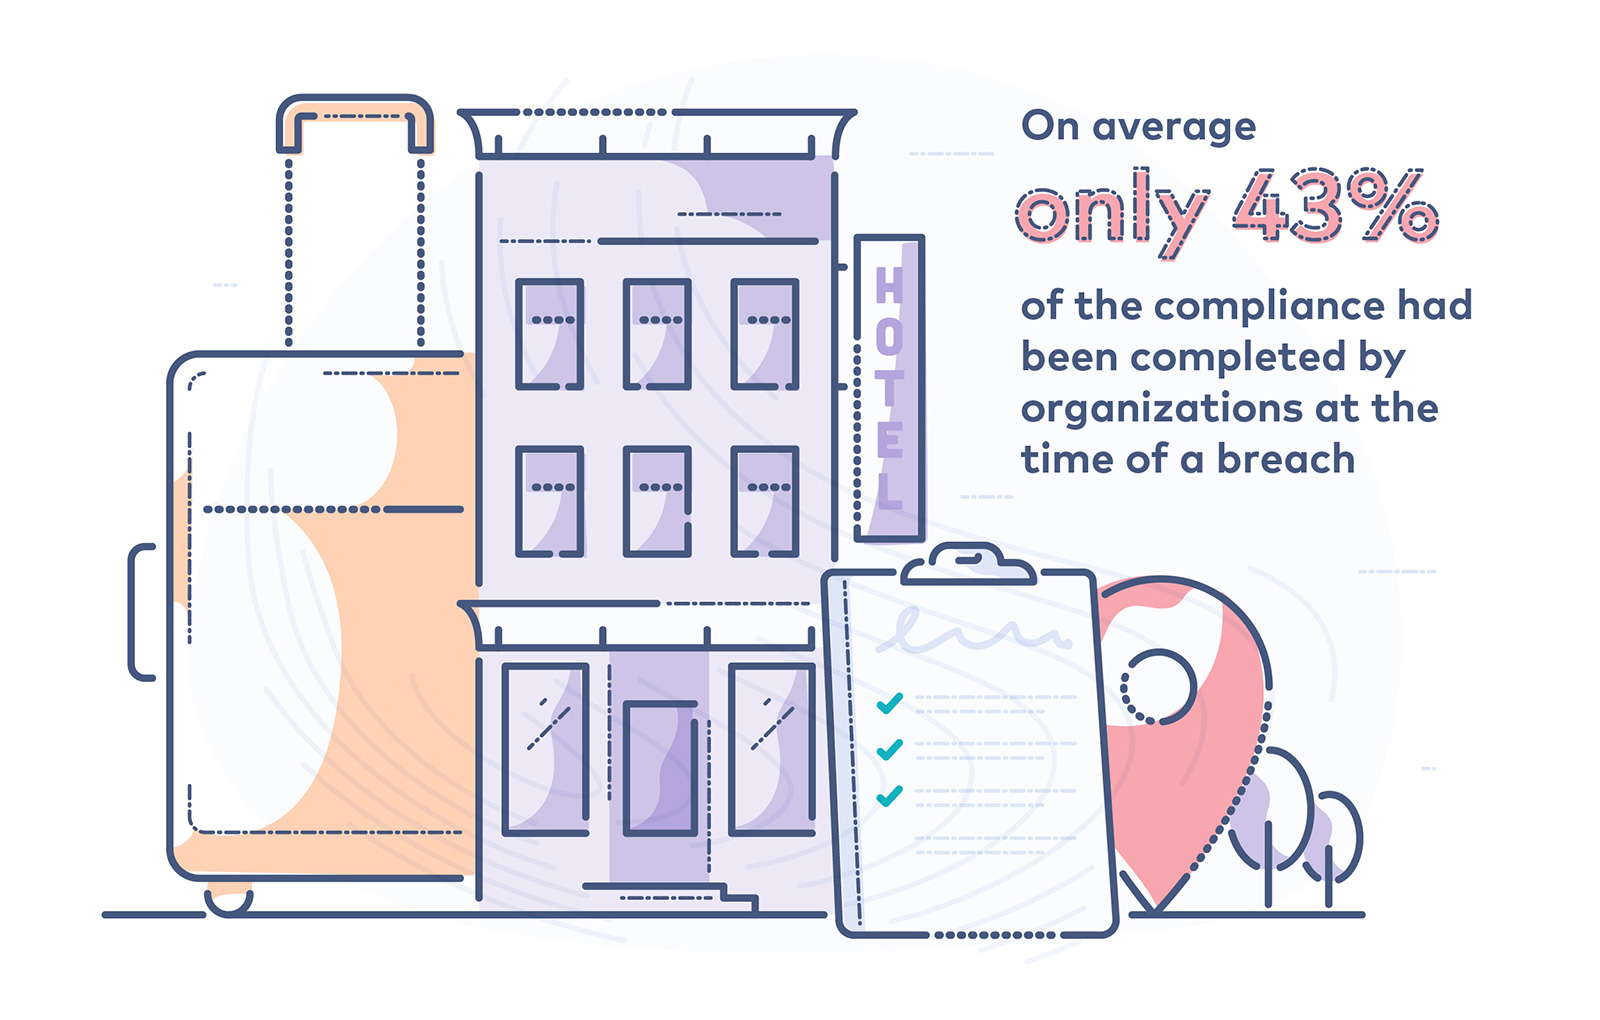 On average only 43% of the compliance had been completed by organizations at the time of breach